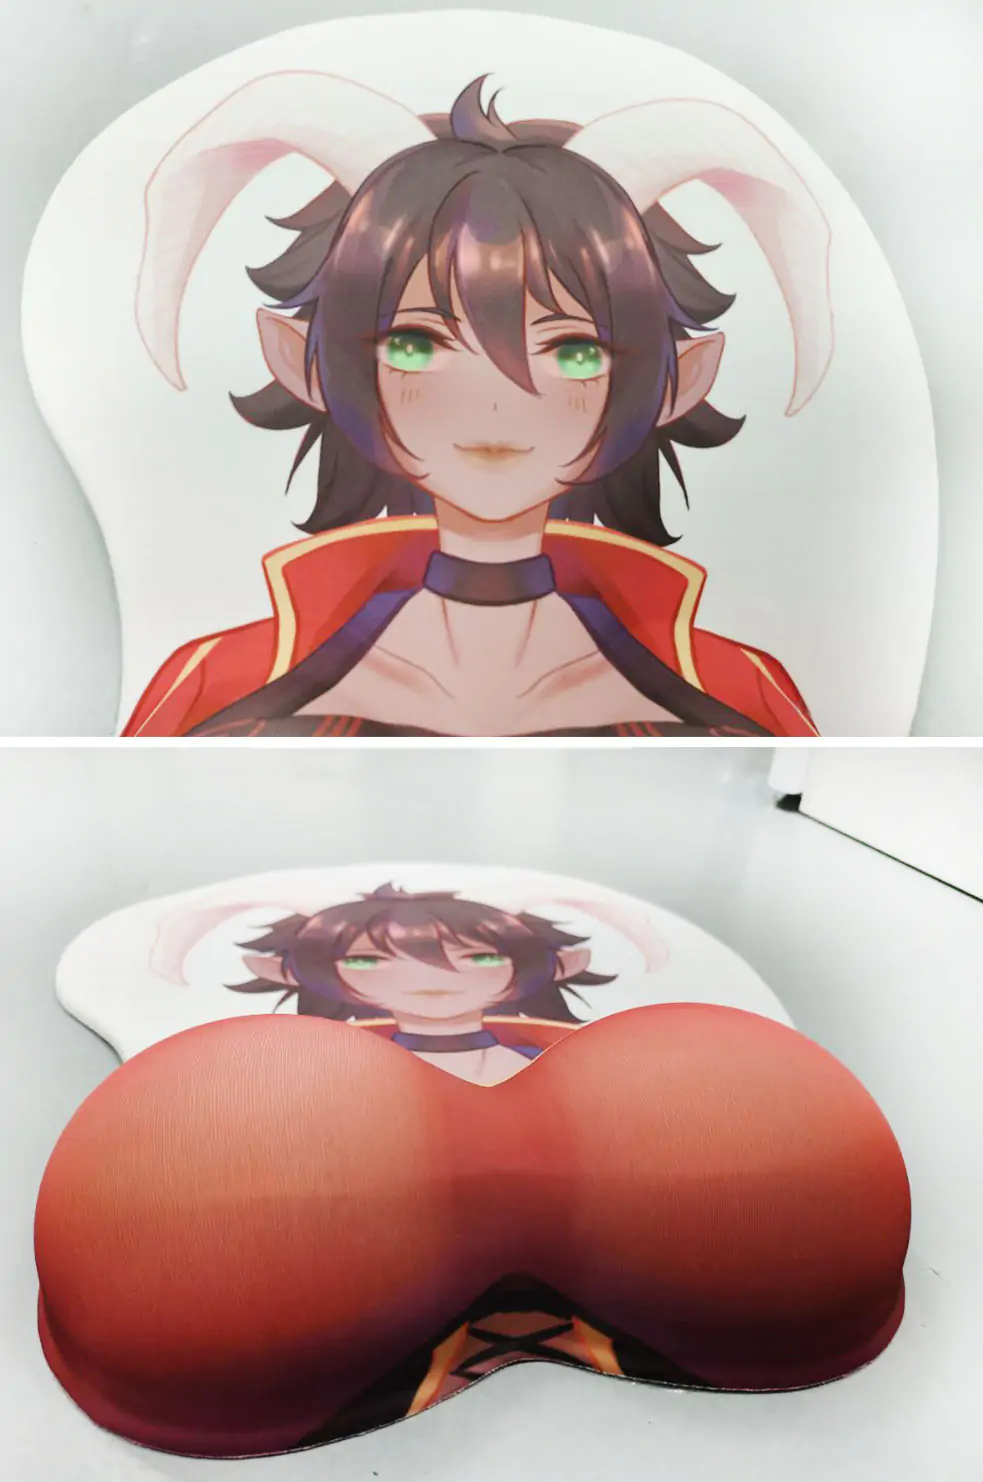 fischl life size oppai mousepad 4855 - Boobie Mouse Pad